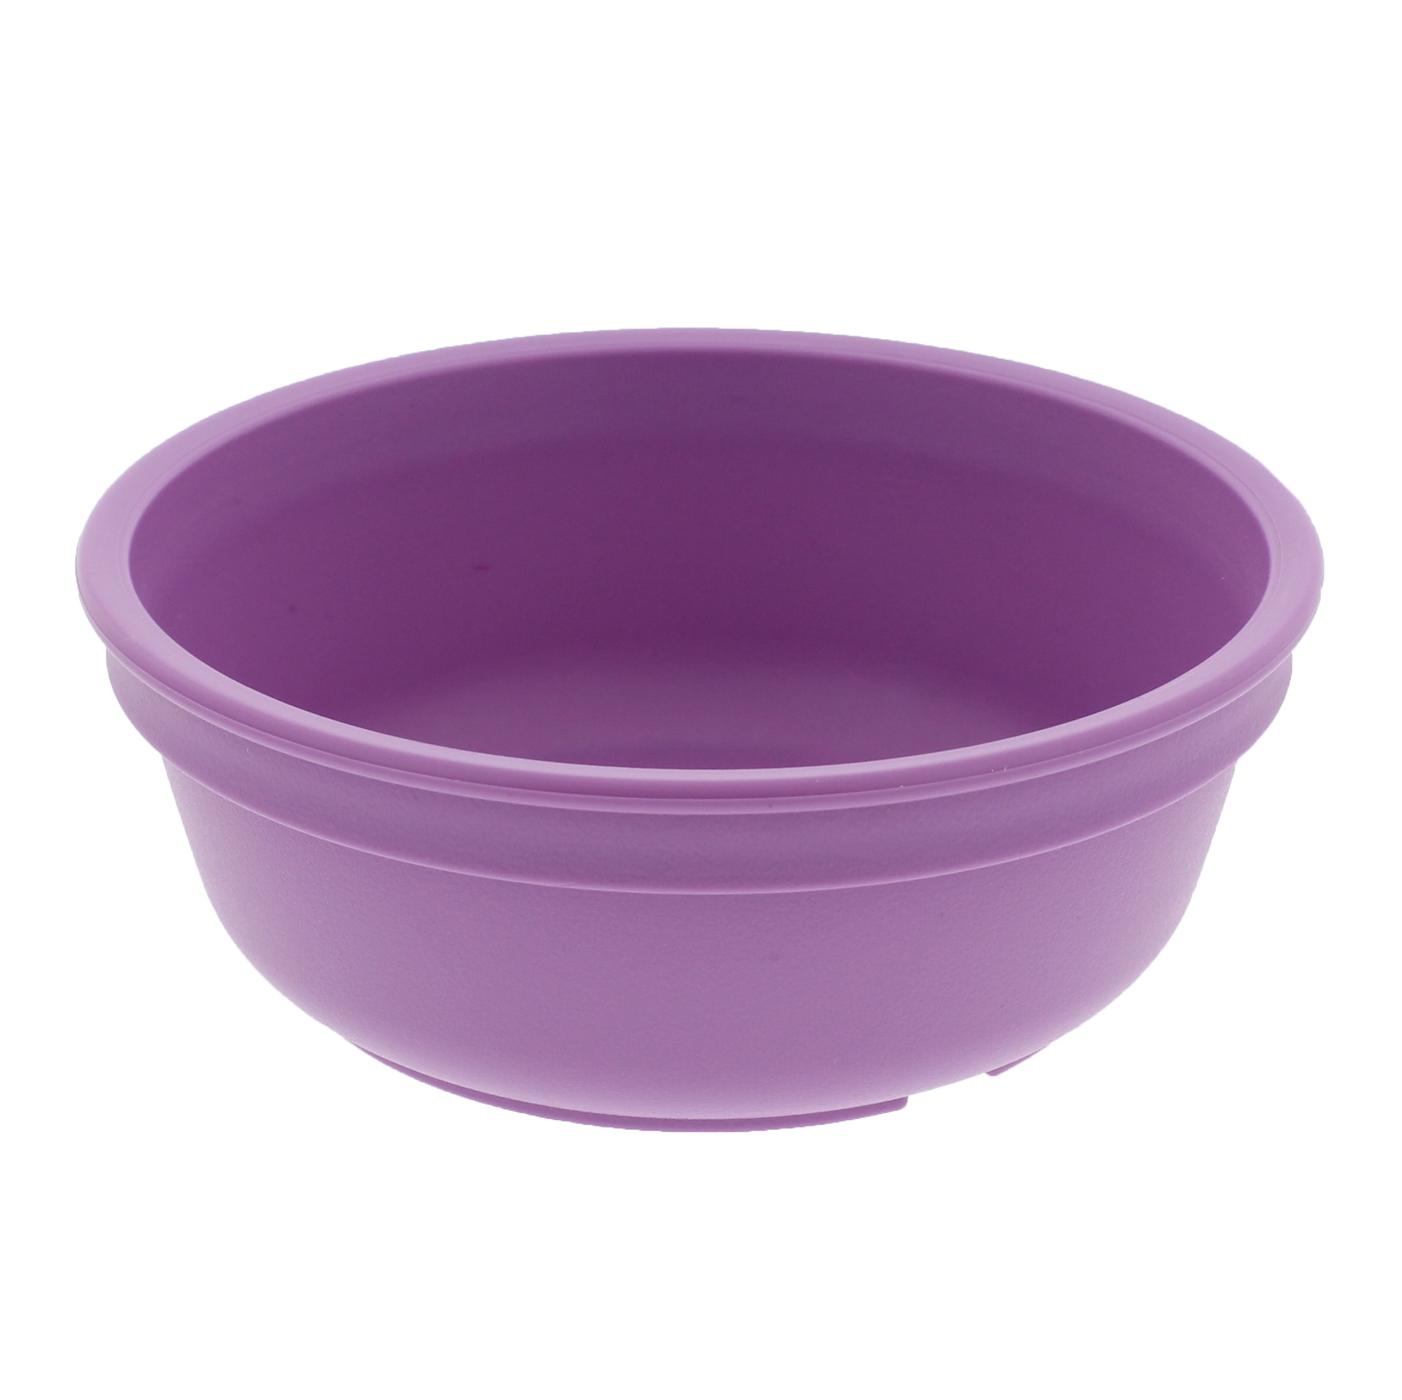 Re-Play Toddler Bowl, Assorted Colors; image 5 of 6